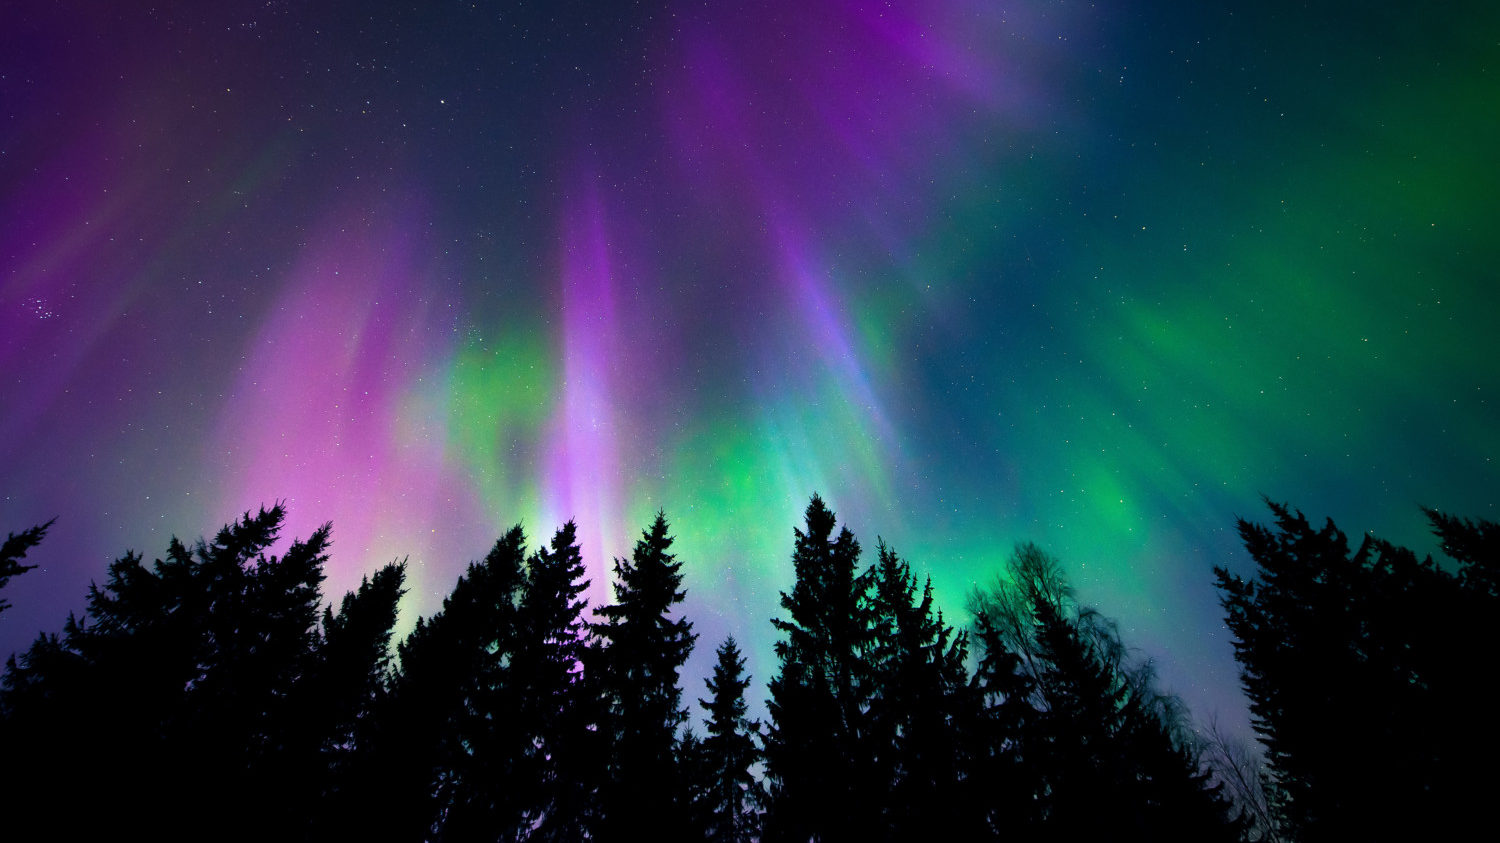 Northern lights seen above trees